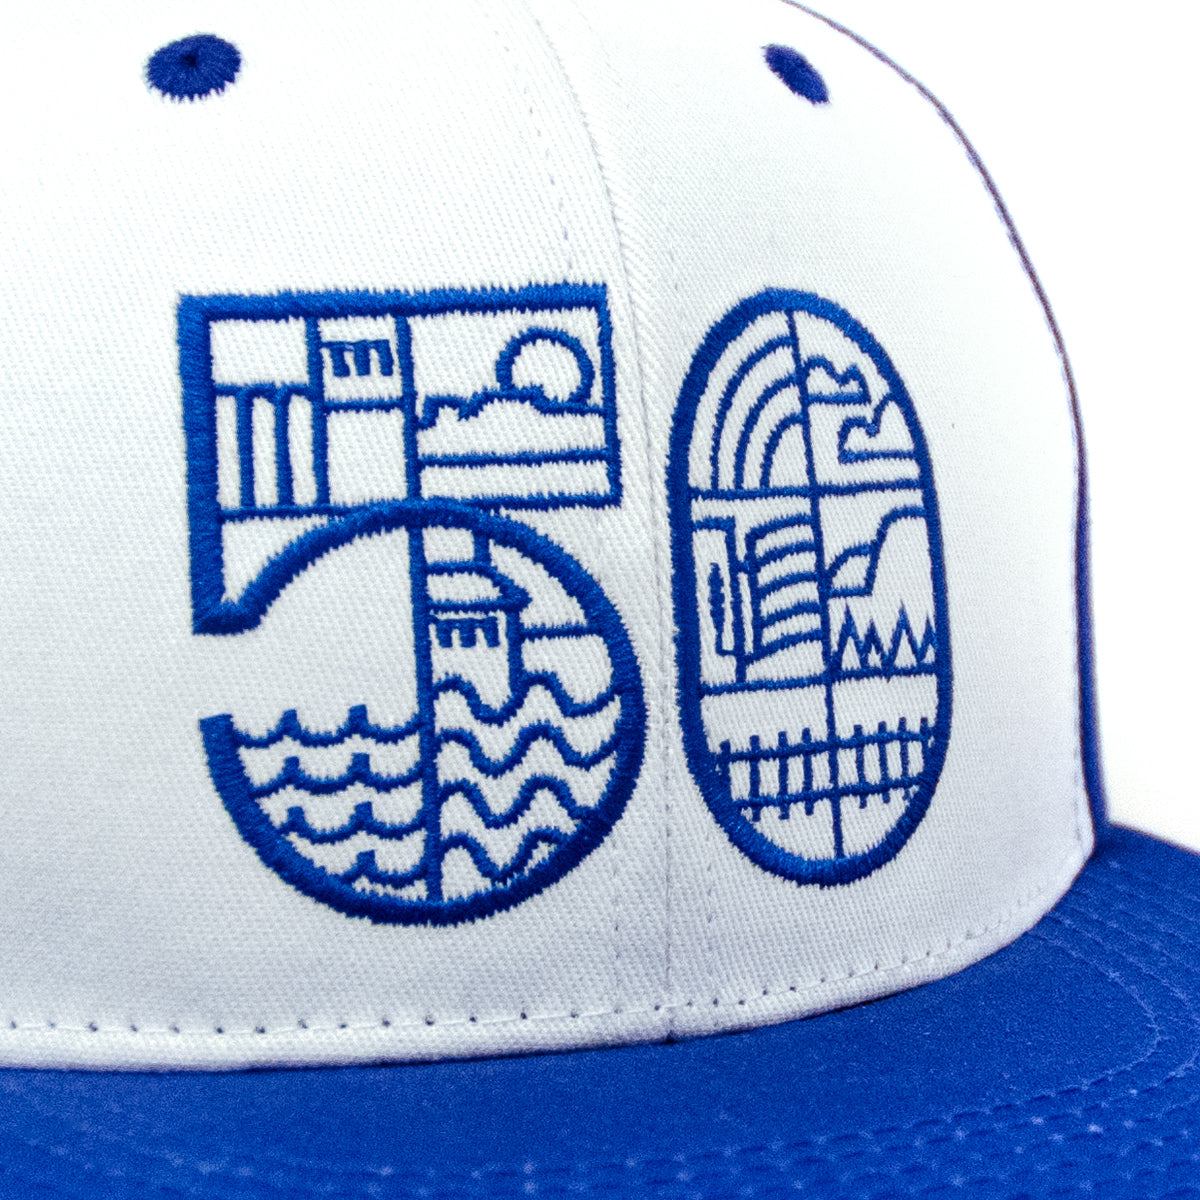 Lost Art Canada - blue one city snapback hat close up view